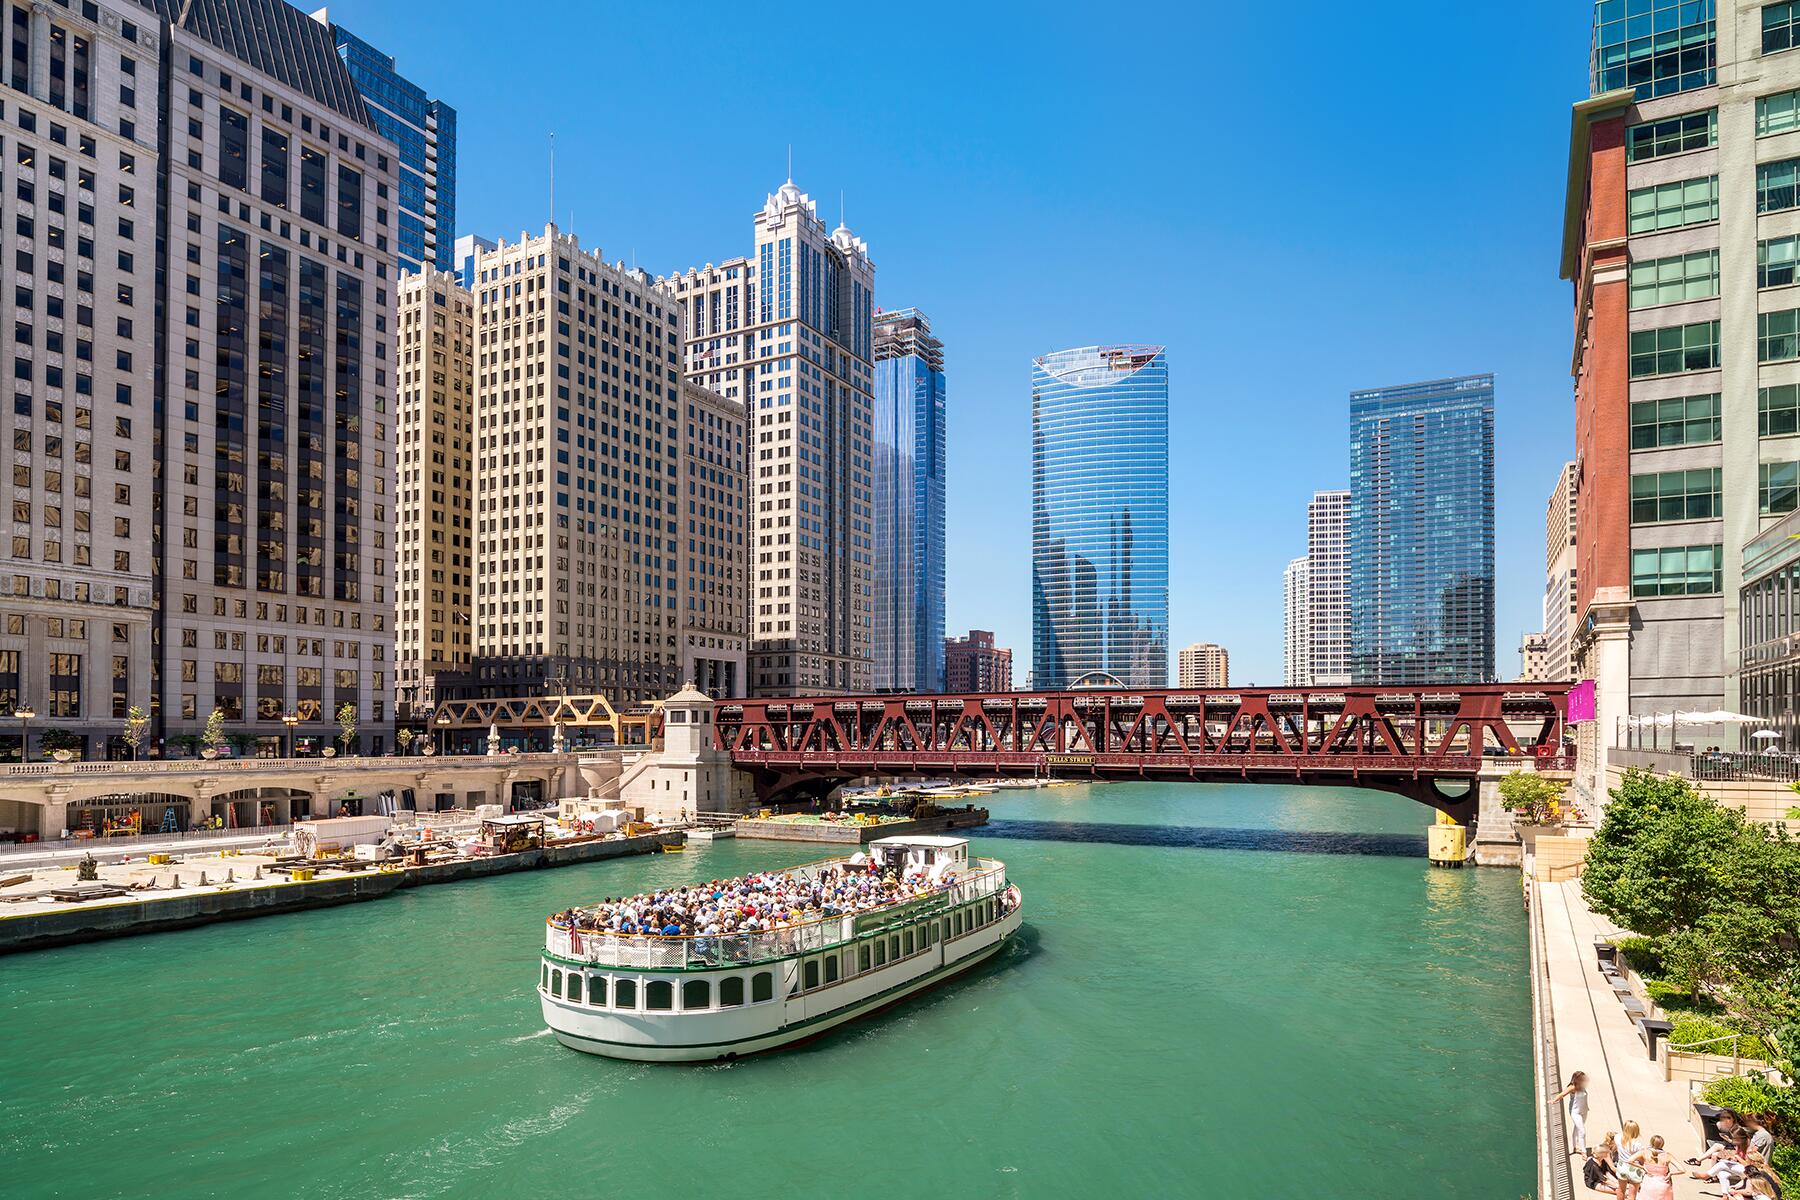 Top 23 Attractions & Things to Do in Chicago – Fodors Travel Guide